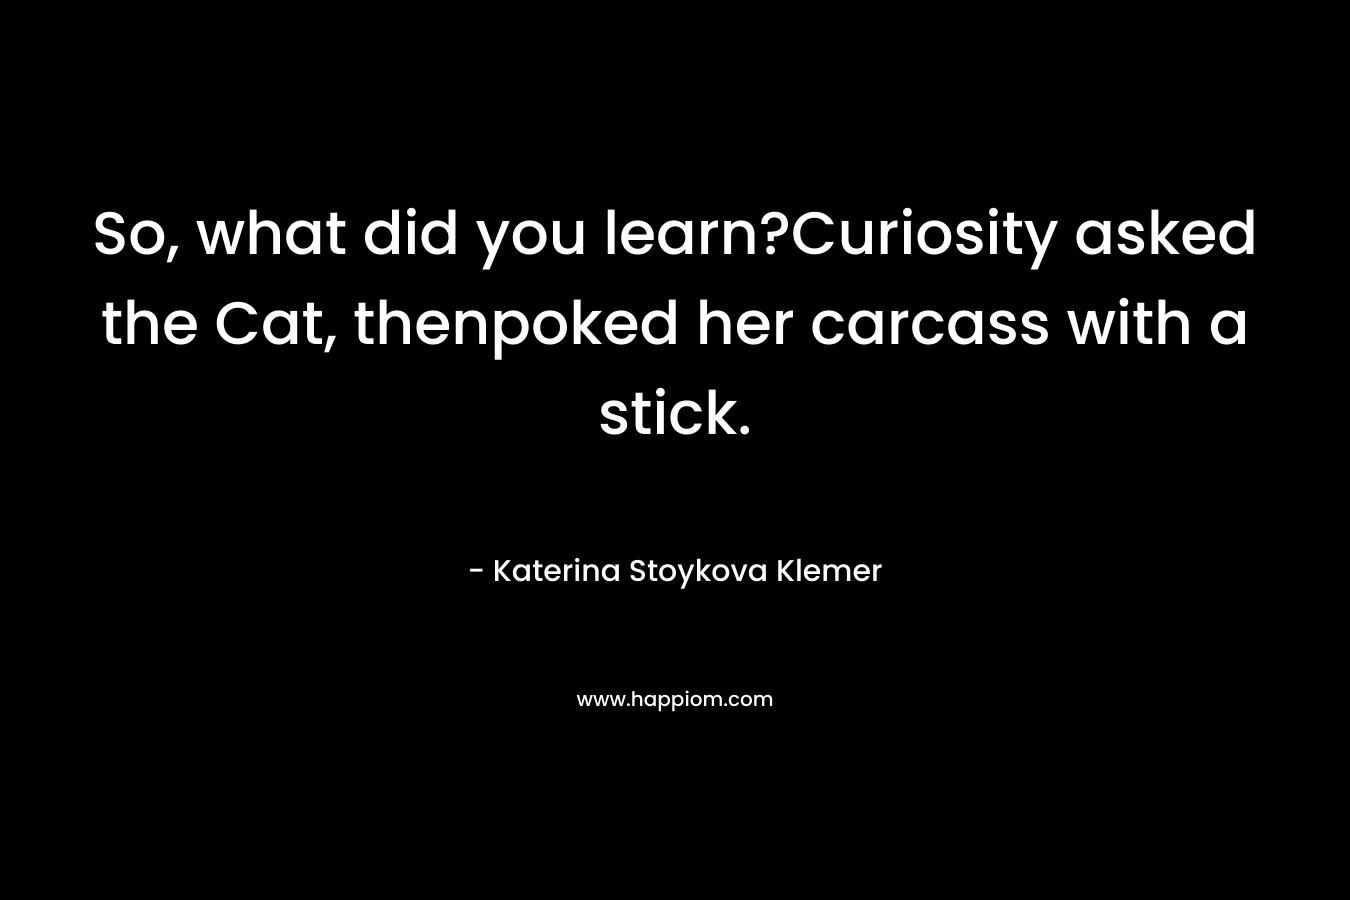 So, what did you learn?Curiosity asked the Cat, thenpoked her carcass with a stick.